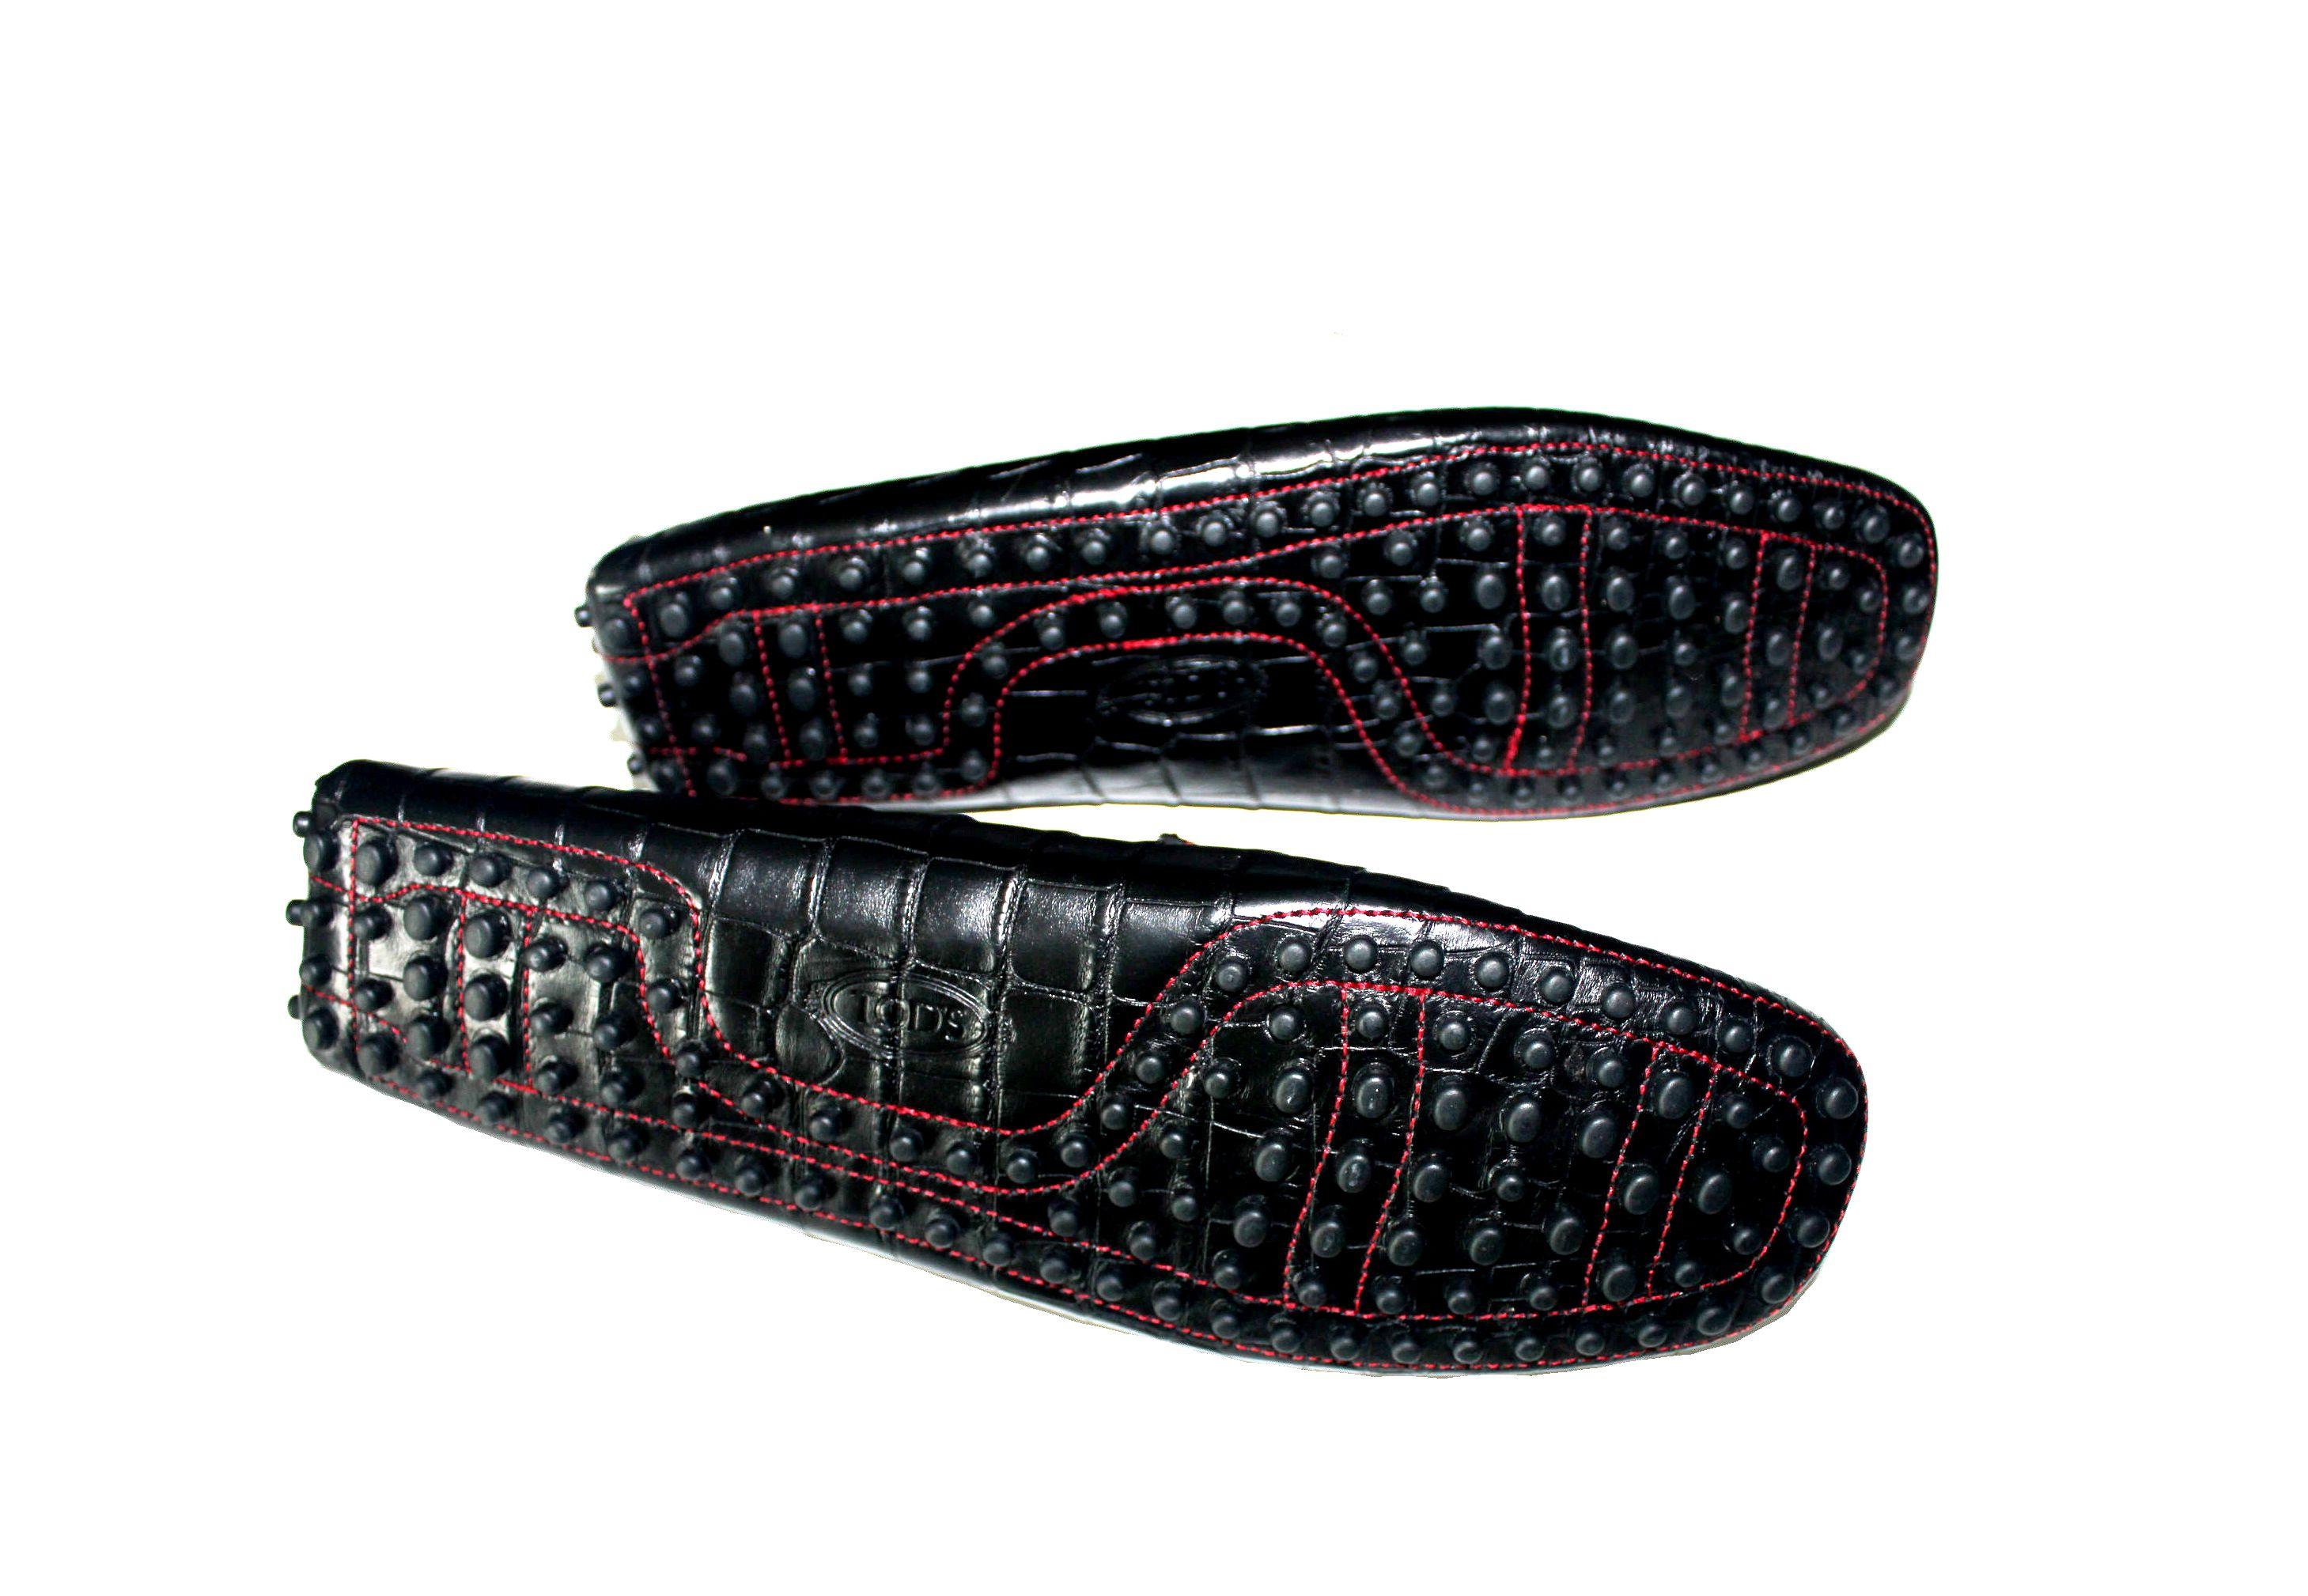 AMAZING

RARE RARE RARE

TOD'S FOR FERRARI LIMITED EDITION MOCCASINS LOAFERS

RETAIL PRICE 7700$ PLUS TAXES

DETAILS:

A signature piece that will last you for years
From an exclusive and limited exotic skin collection produced for Ferrari
Pure